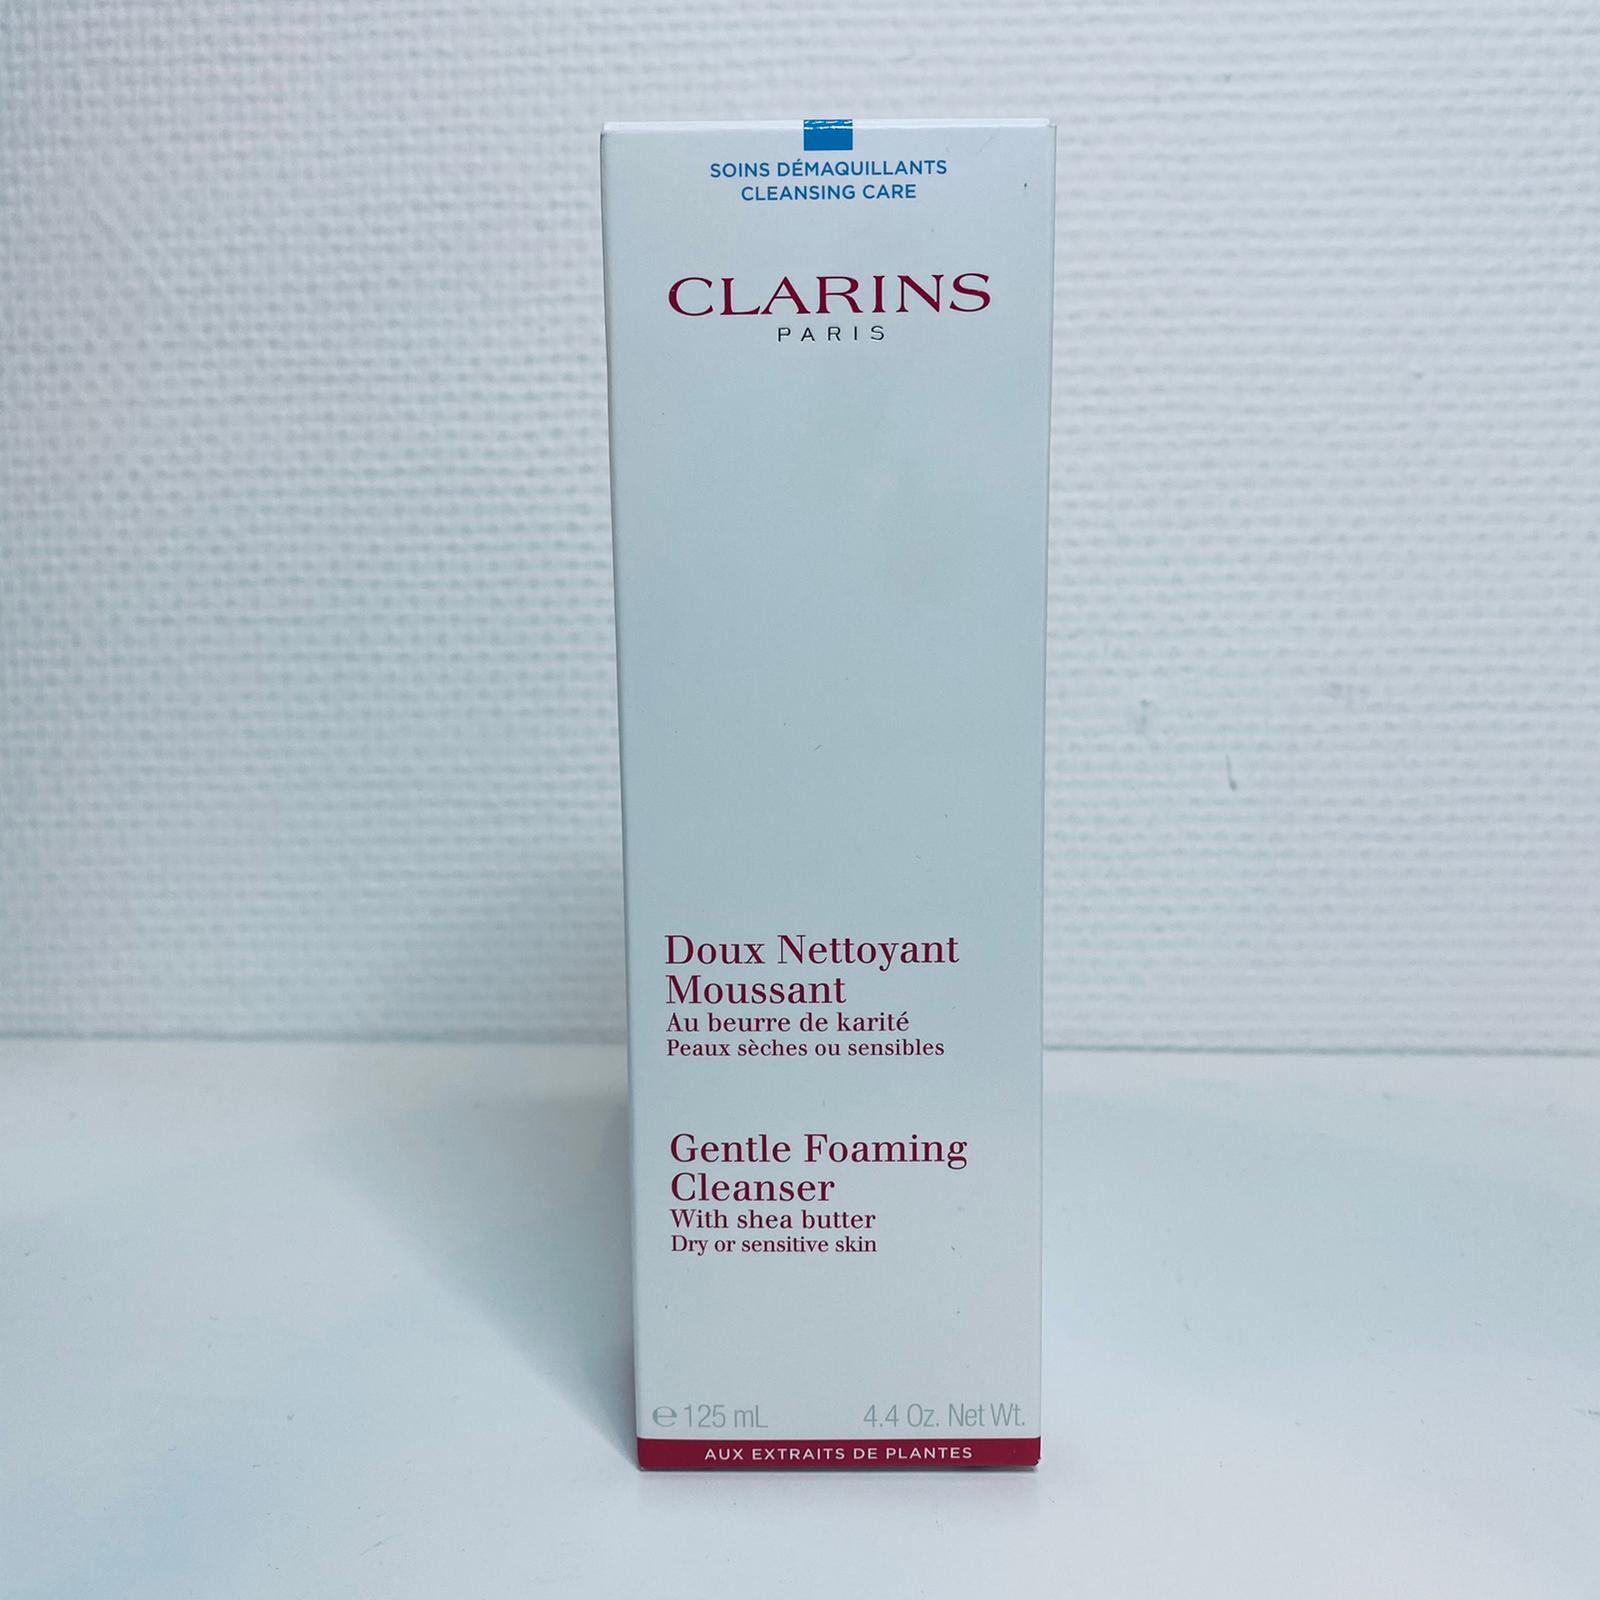 Clarins Gentle foaming cleanser with shea butter. for dry or sensitive skin. 125 ml